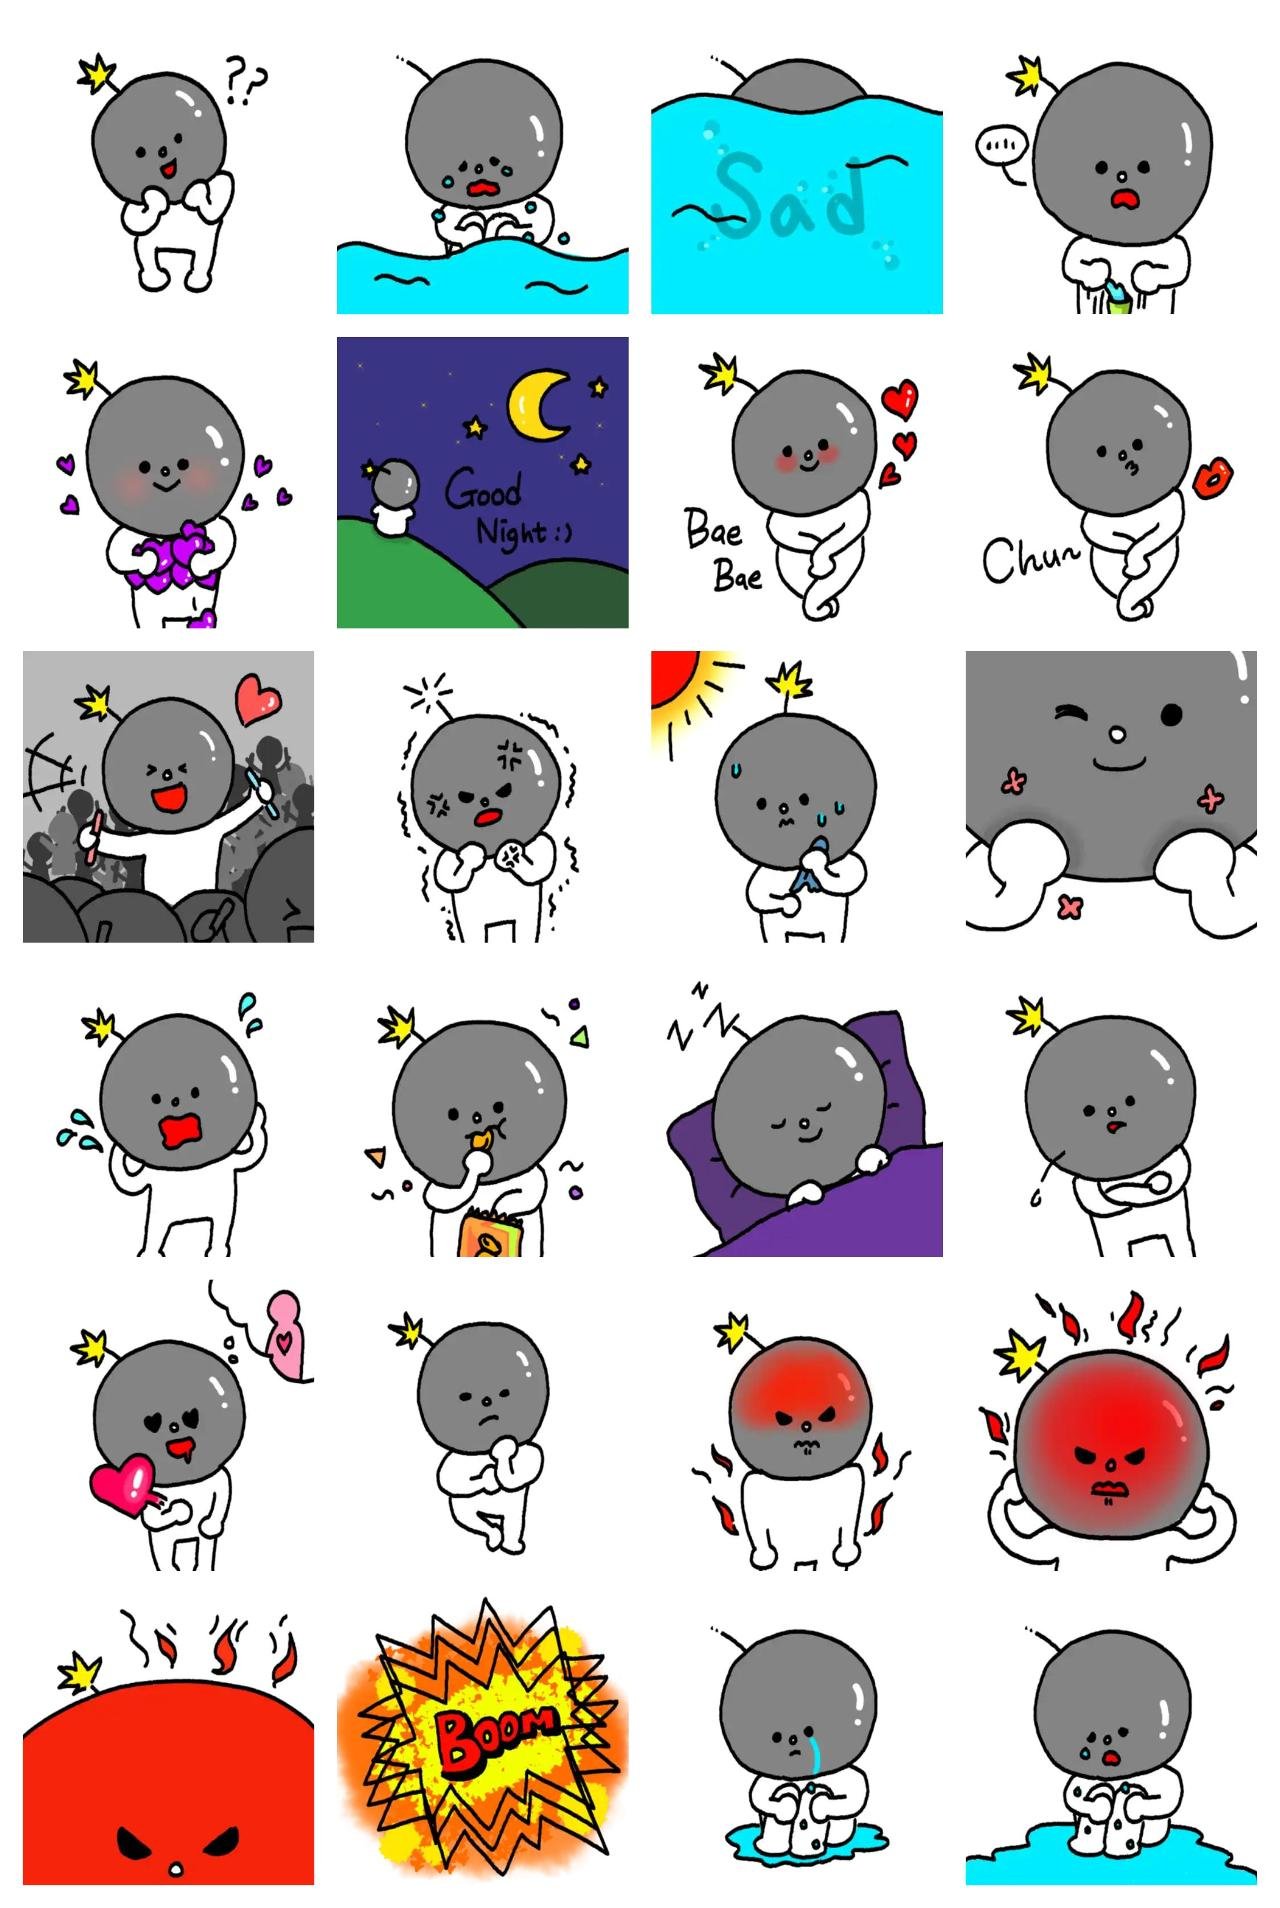 Bomb Bomb Etc. sticker pack for Whatsapp, Telegram, Signal, and others chatting and message apps